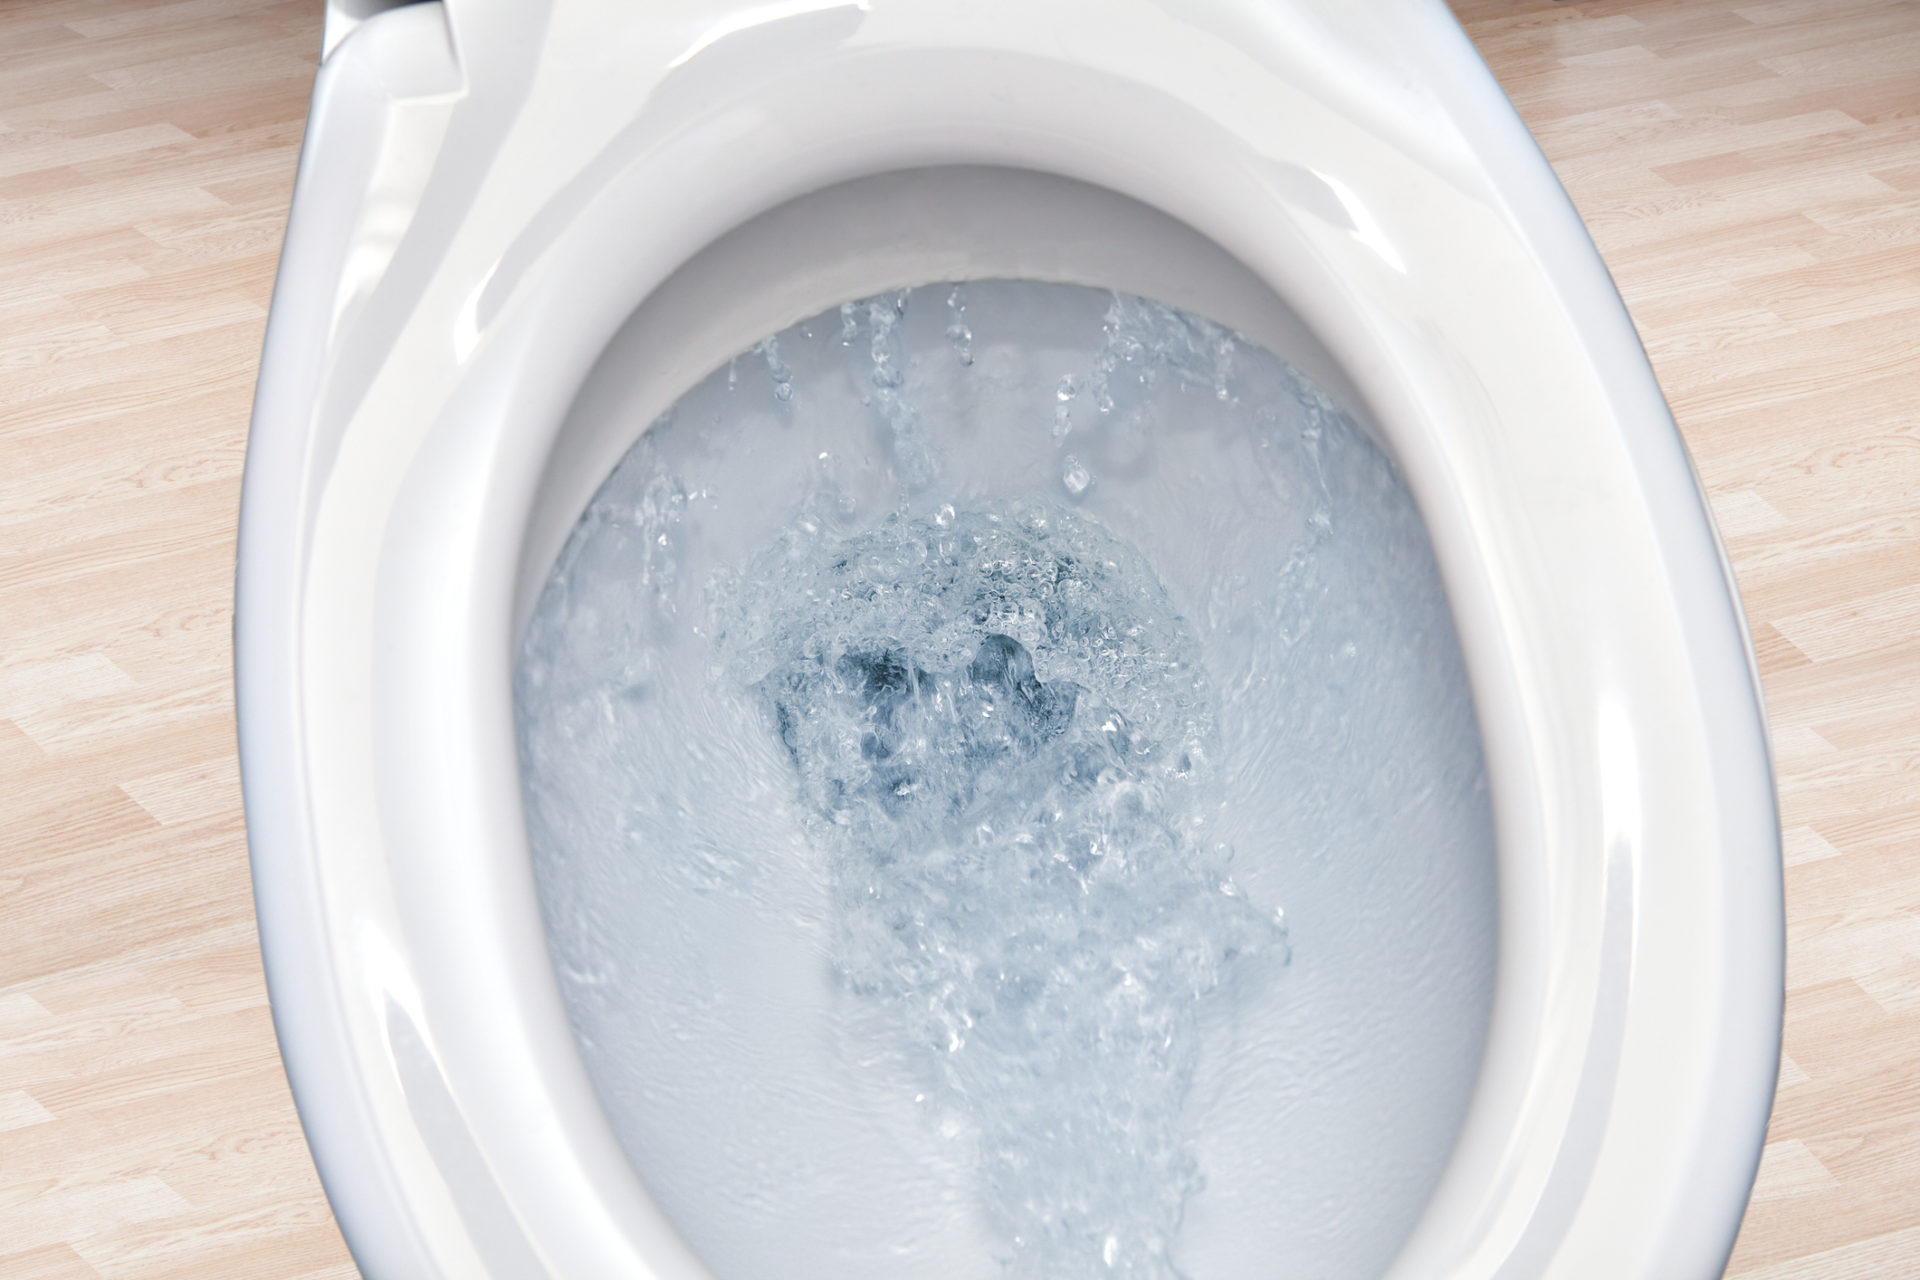 Toilet Bowl Filling Up Too High When Flushing